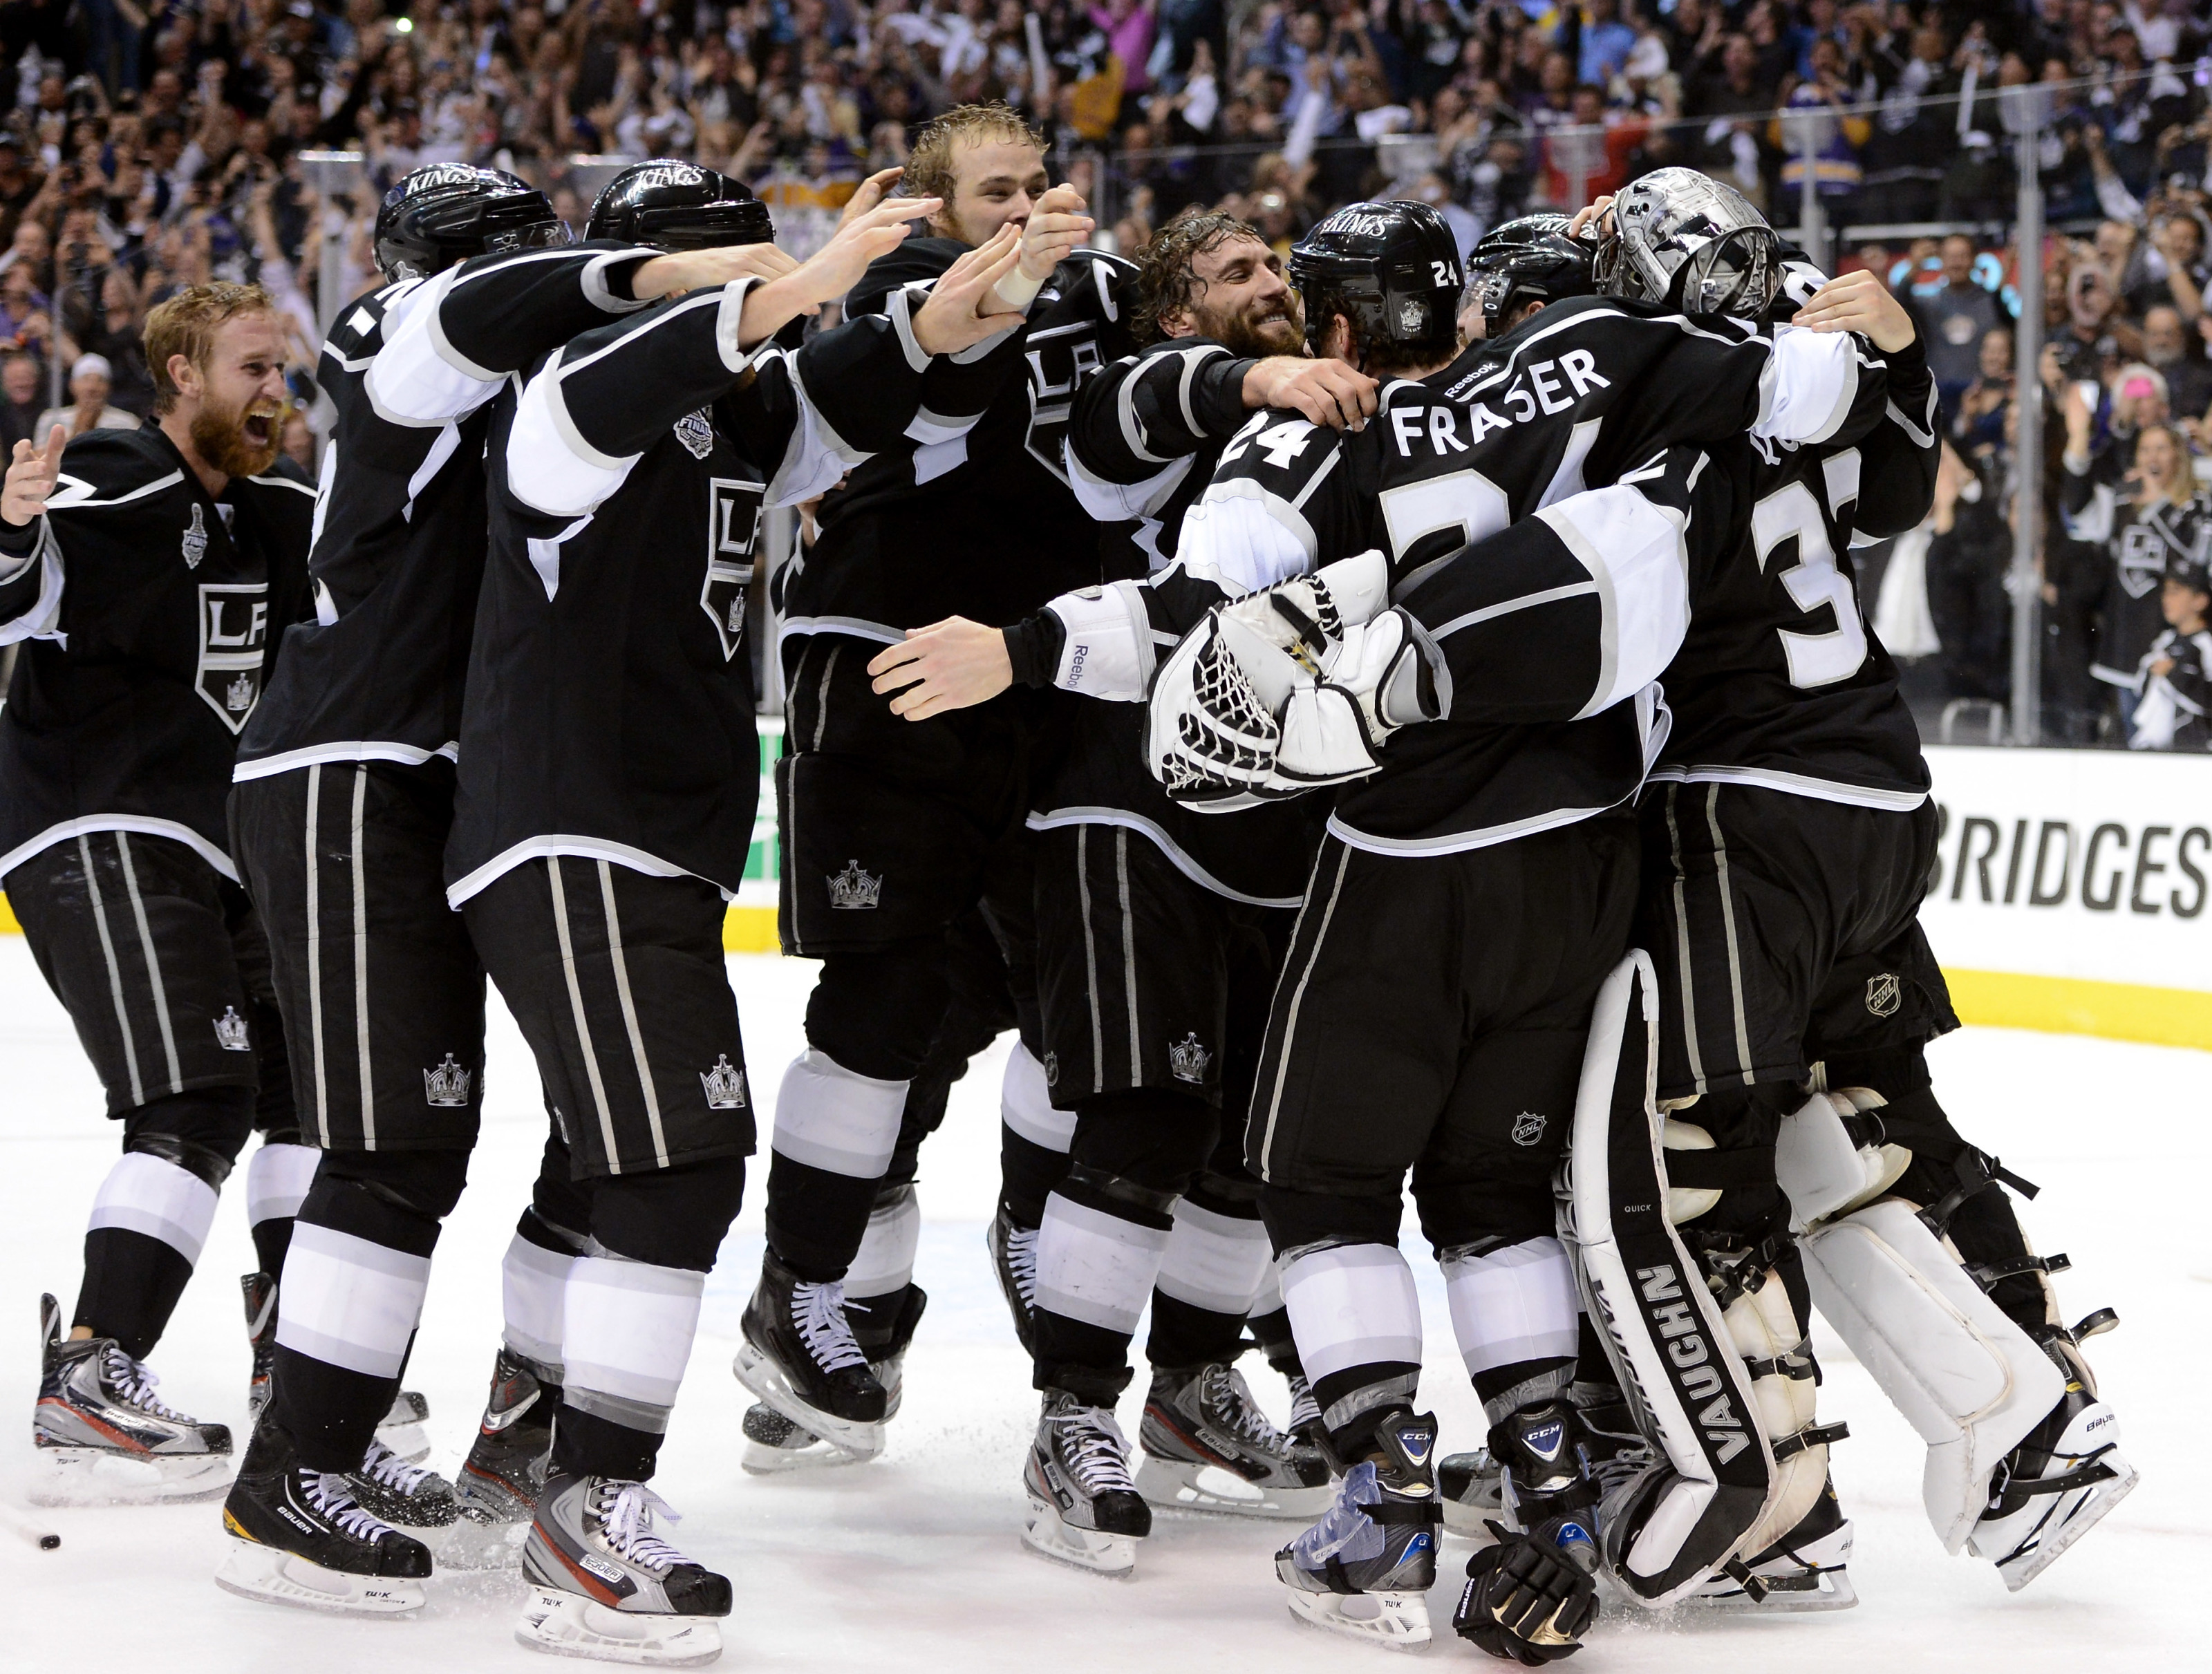 Kings Win 2012 Stanley Cup With Game 6 Blowout Of Devils - SB